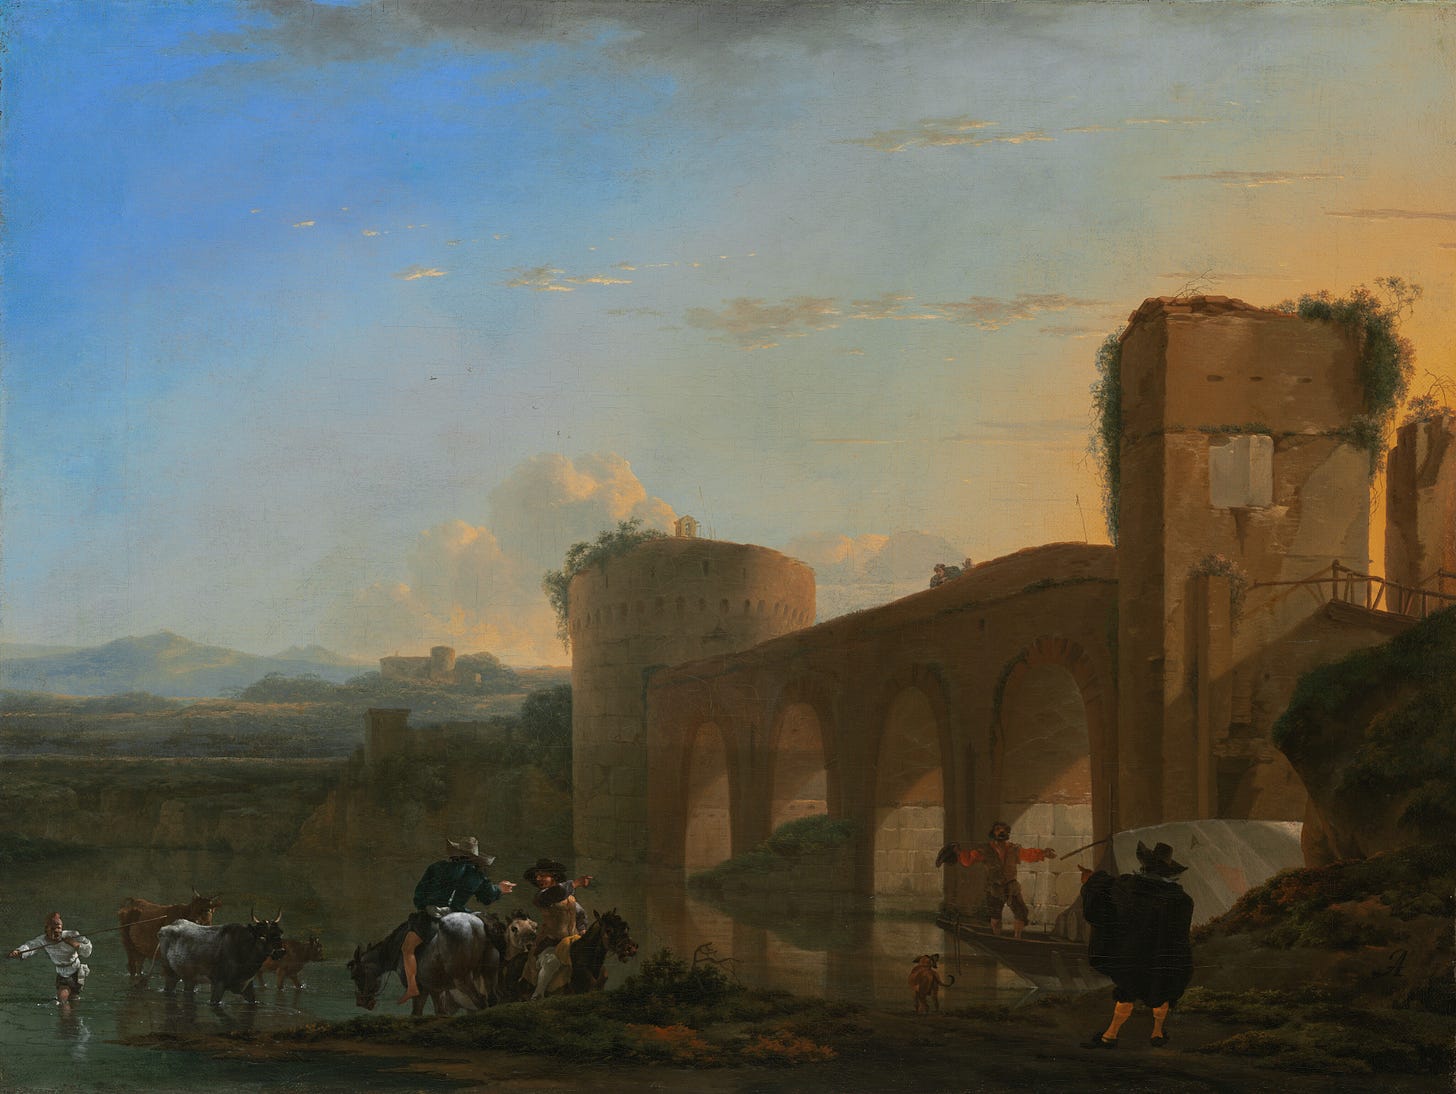 The Tiber River with the Ponte Molle at Sunset, c. 1650 by Jan Asselijn